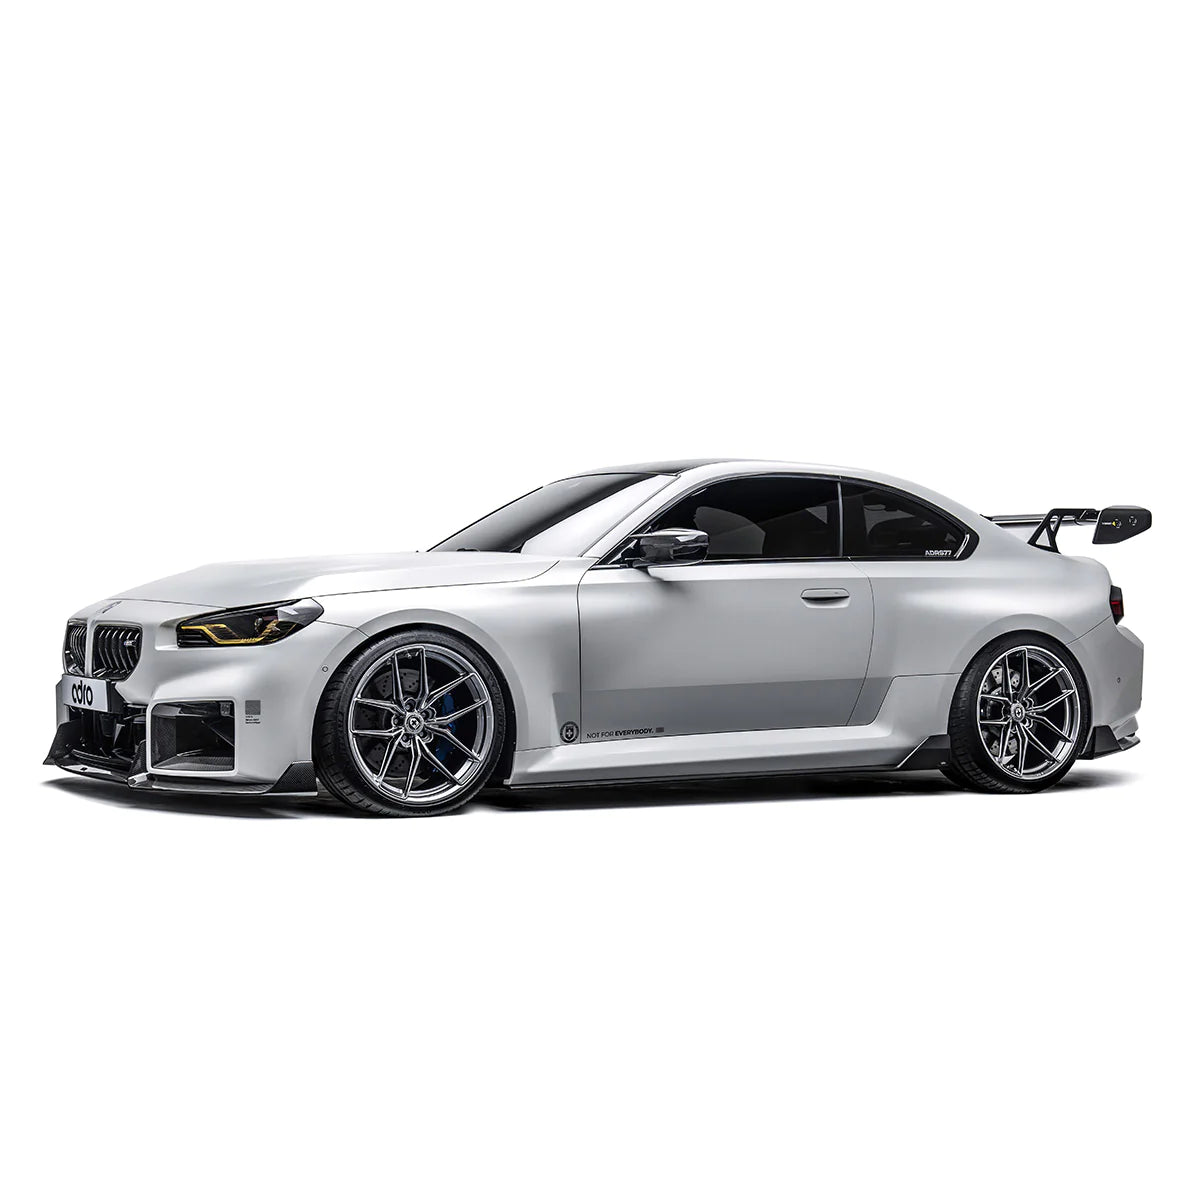 ADRO BMW G87 M2 SIDE SKIRTS - PREORDER NOW!